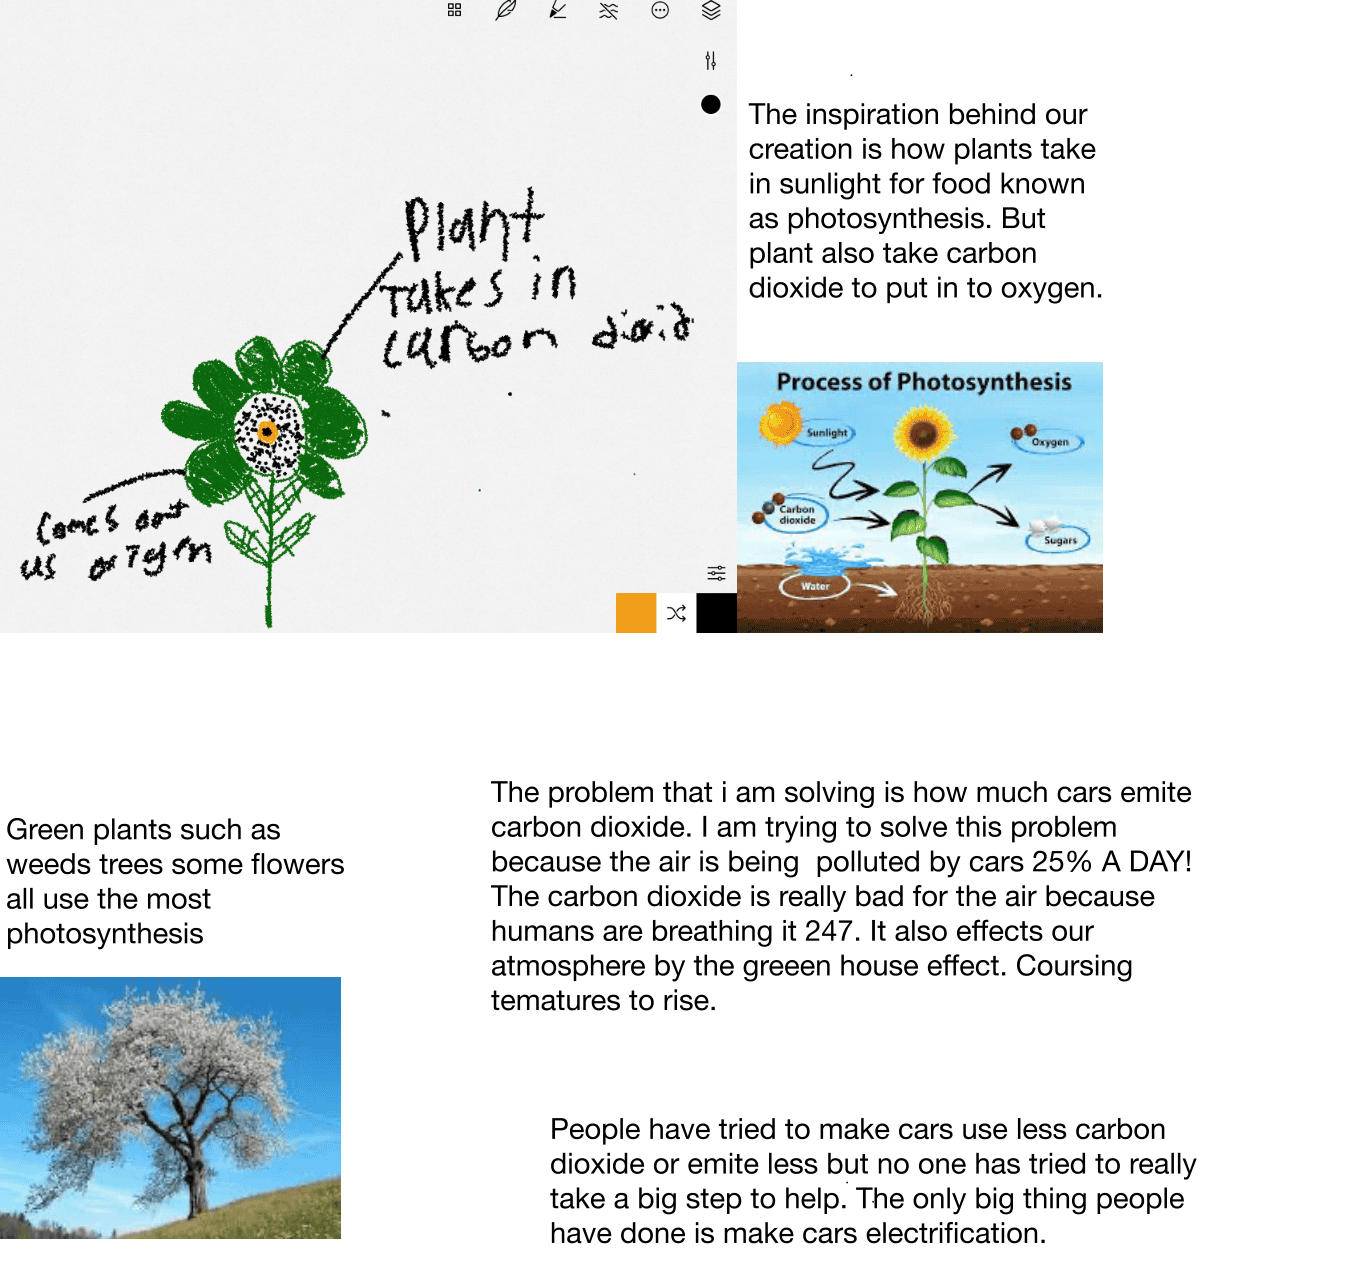 Image with the text of a students project stating that their inspiration for the biomimicry unit is the process of photosynthesis. They would like to figure out a car that could use the concept of photosynthesis to produce less carbon dioxide pollution.